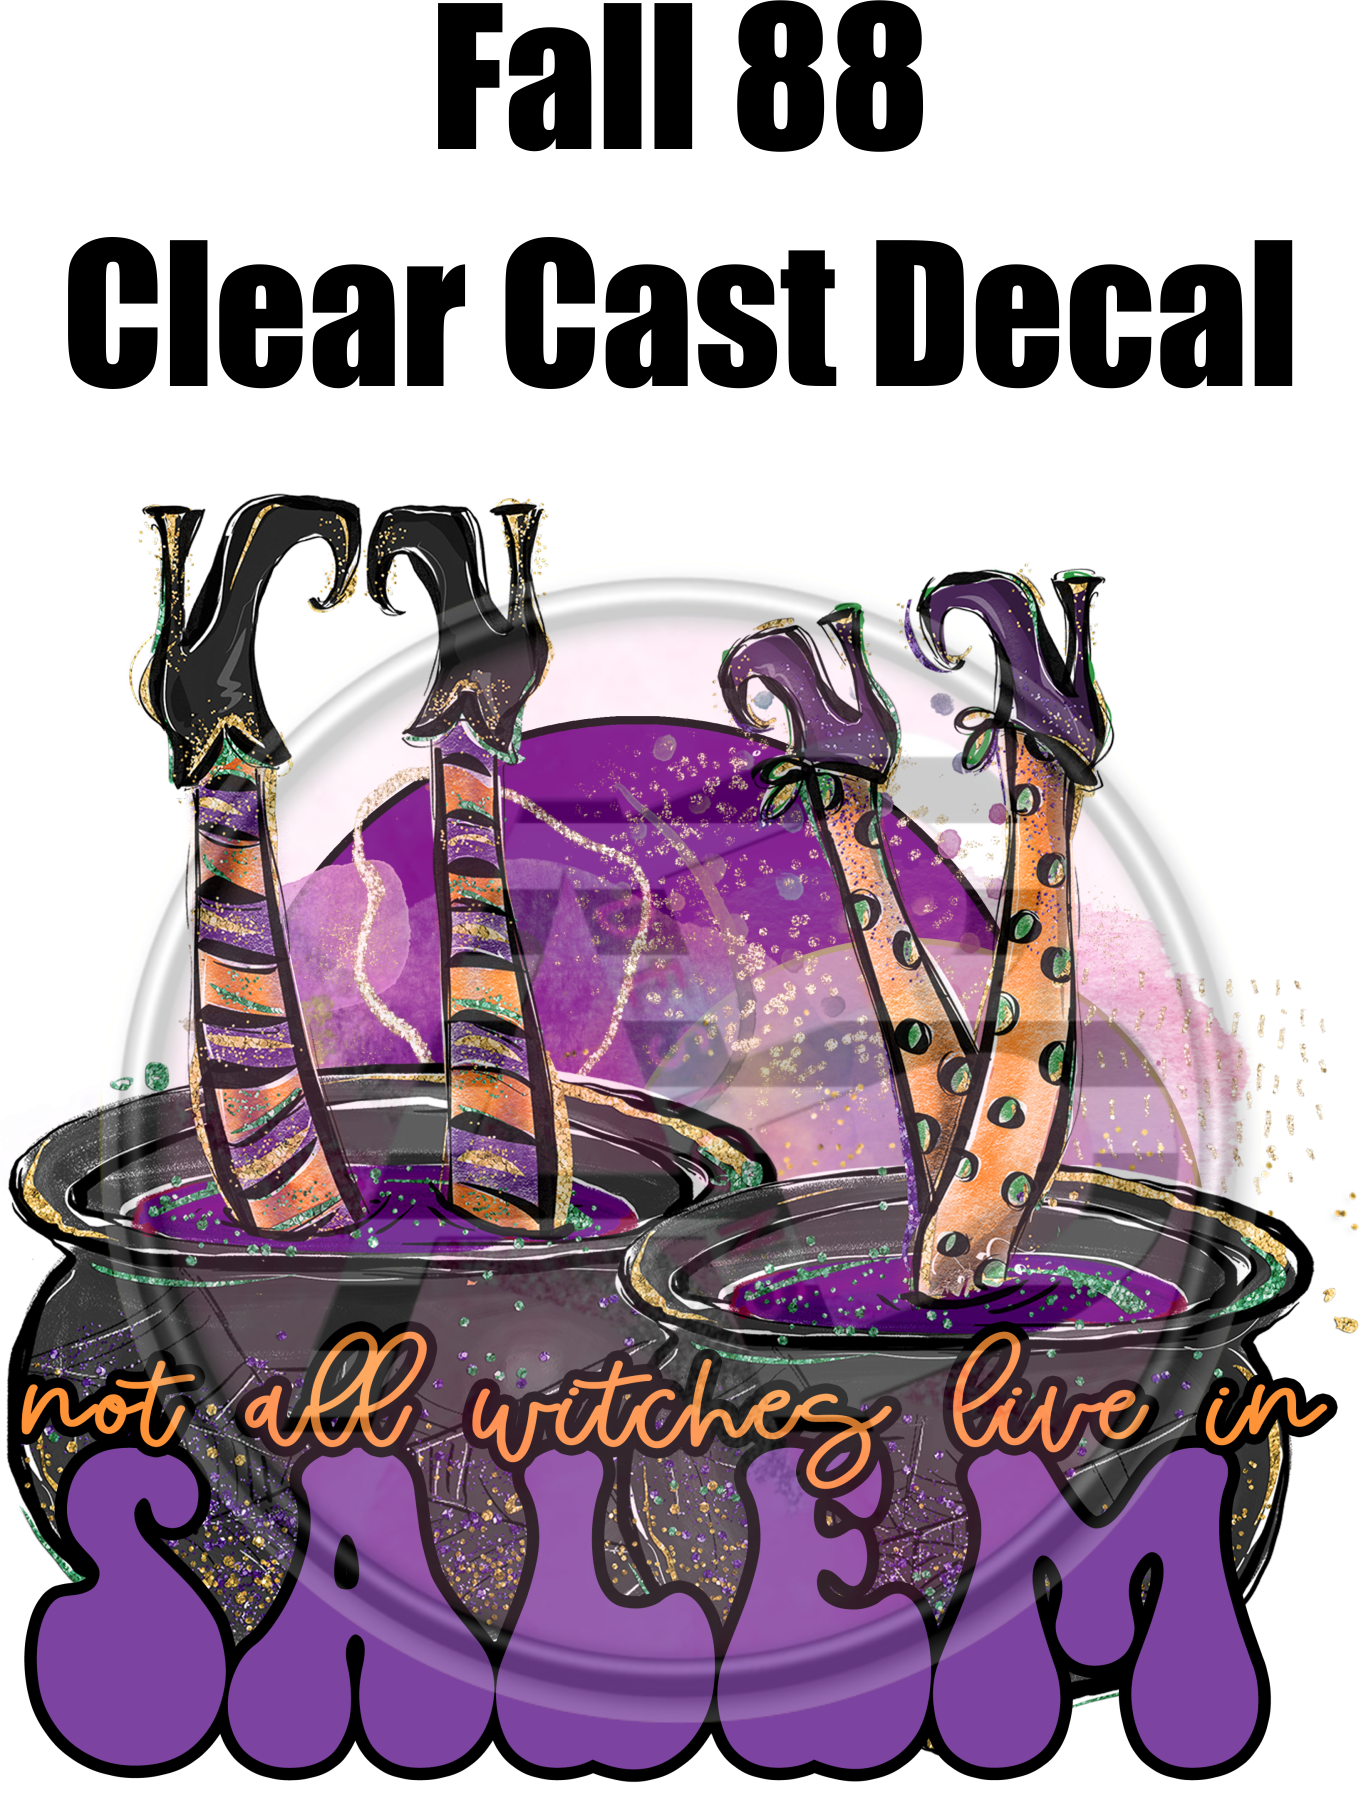 Fall 88 - Clear Cast Decal